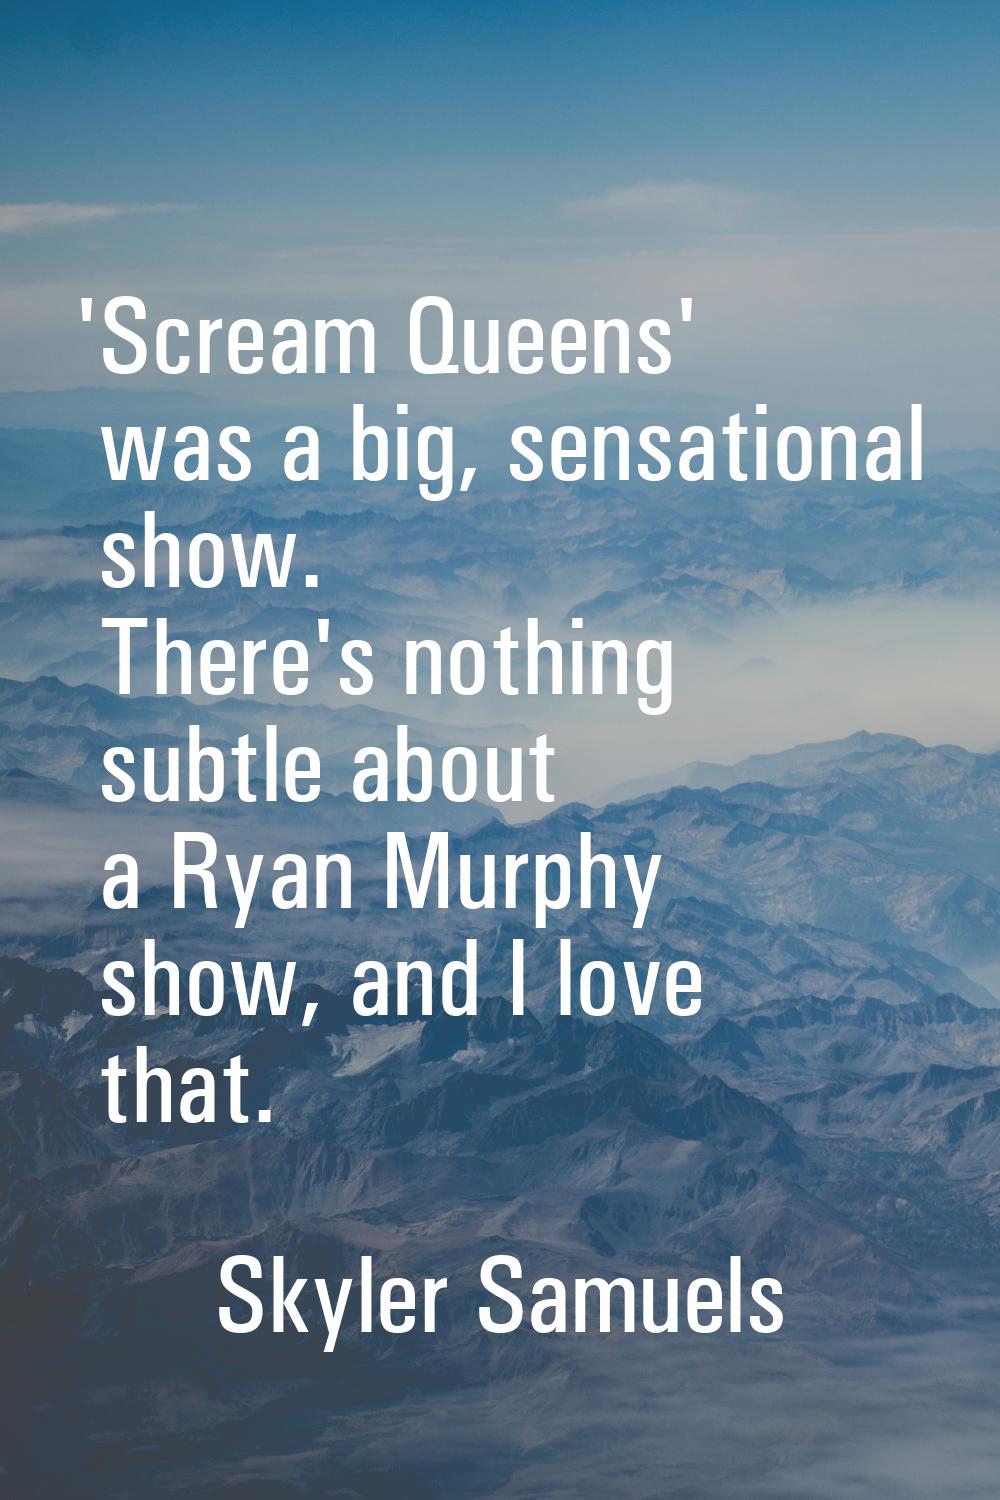 'Scream Queens' was a big, sensational show. There's nothing subtle about a Ryan Murphy show, and I